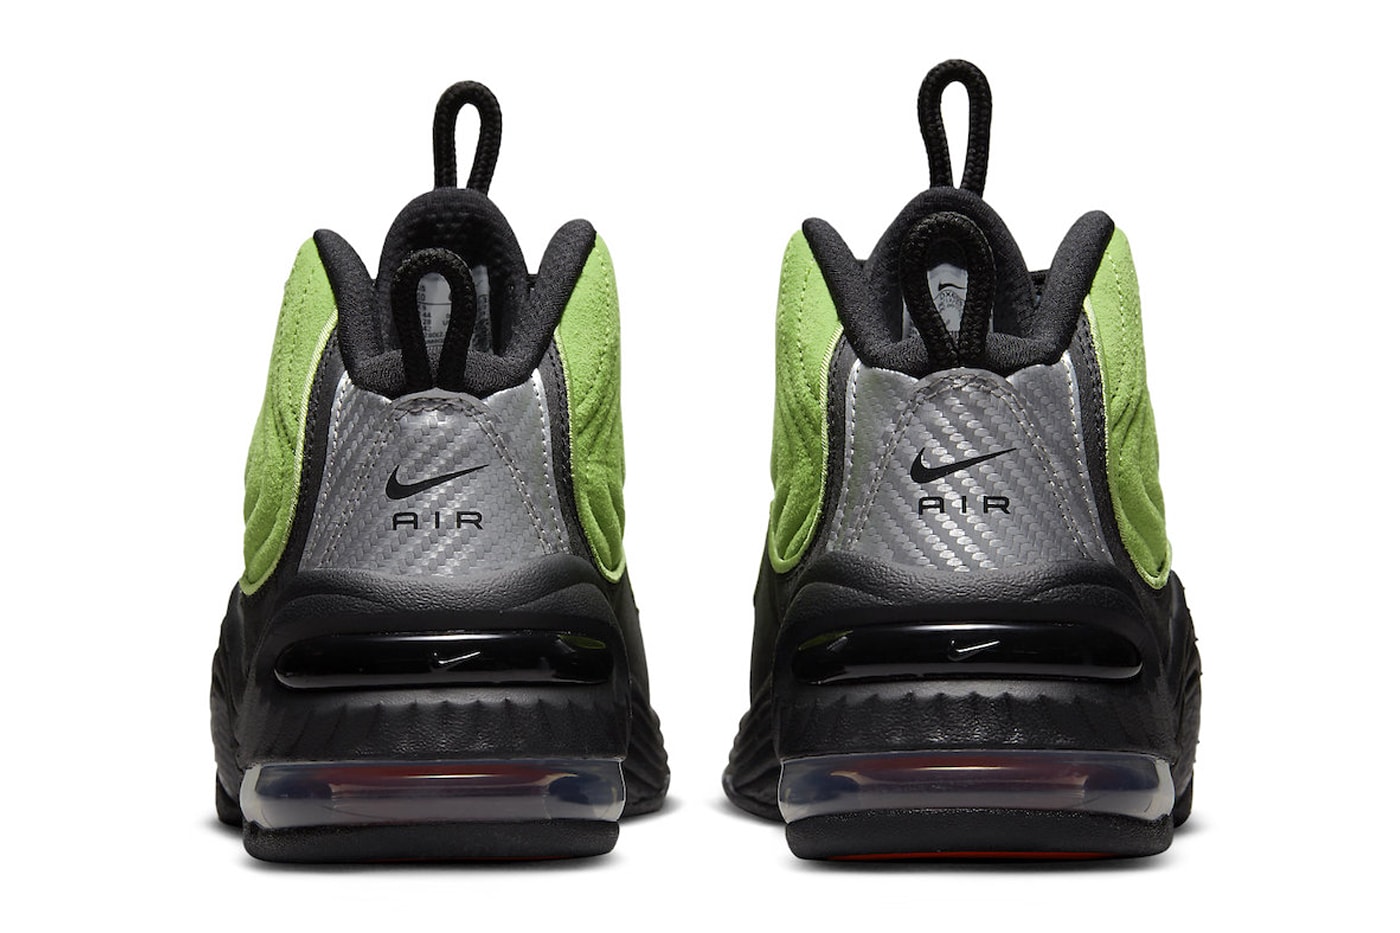 Stüssy Nike Air Max Penny 2 Black Vivid Green Release Date Info DQ5674-001 DX6933-300 Buy Price 